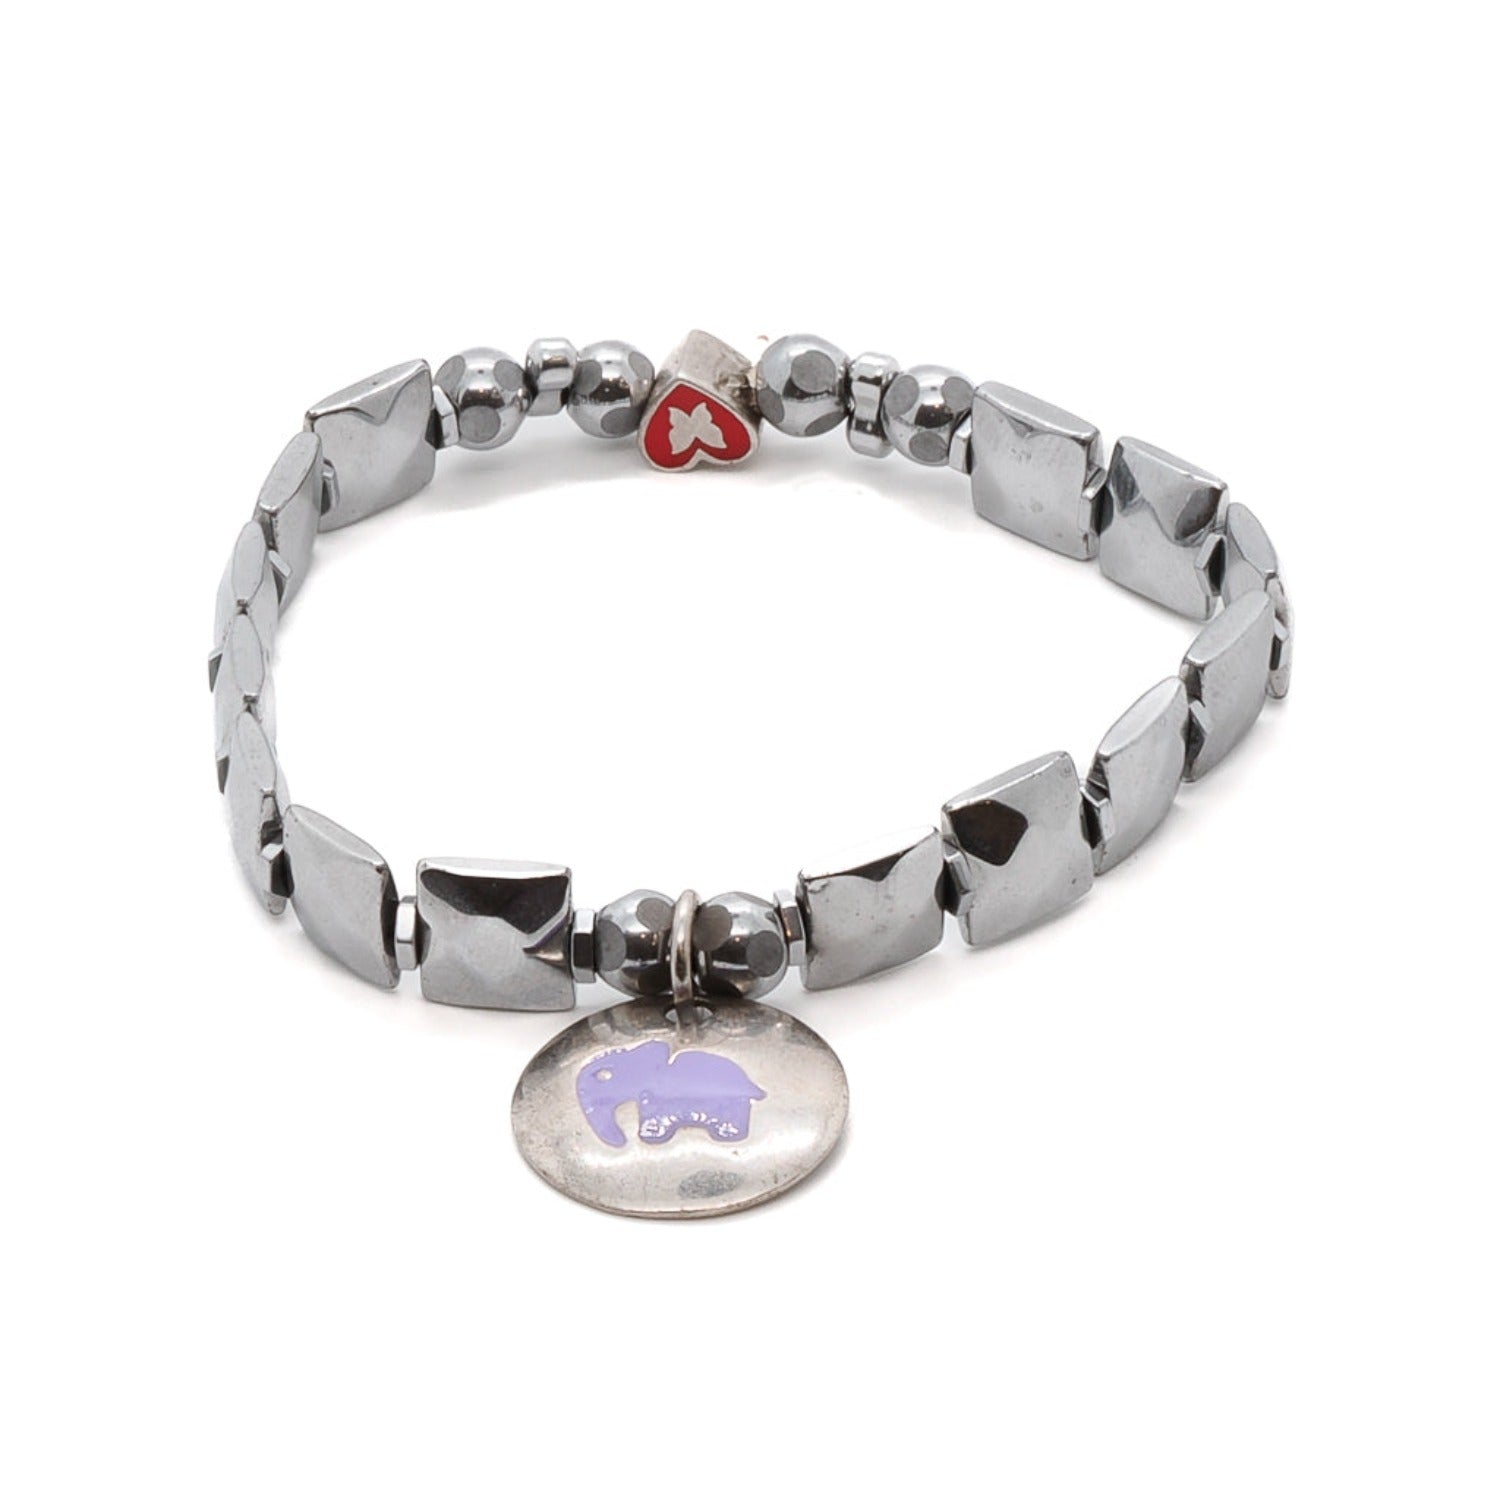 The Hope Elephant Bracelet, featuring faceted hematite beads and sterling silver charms.